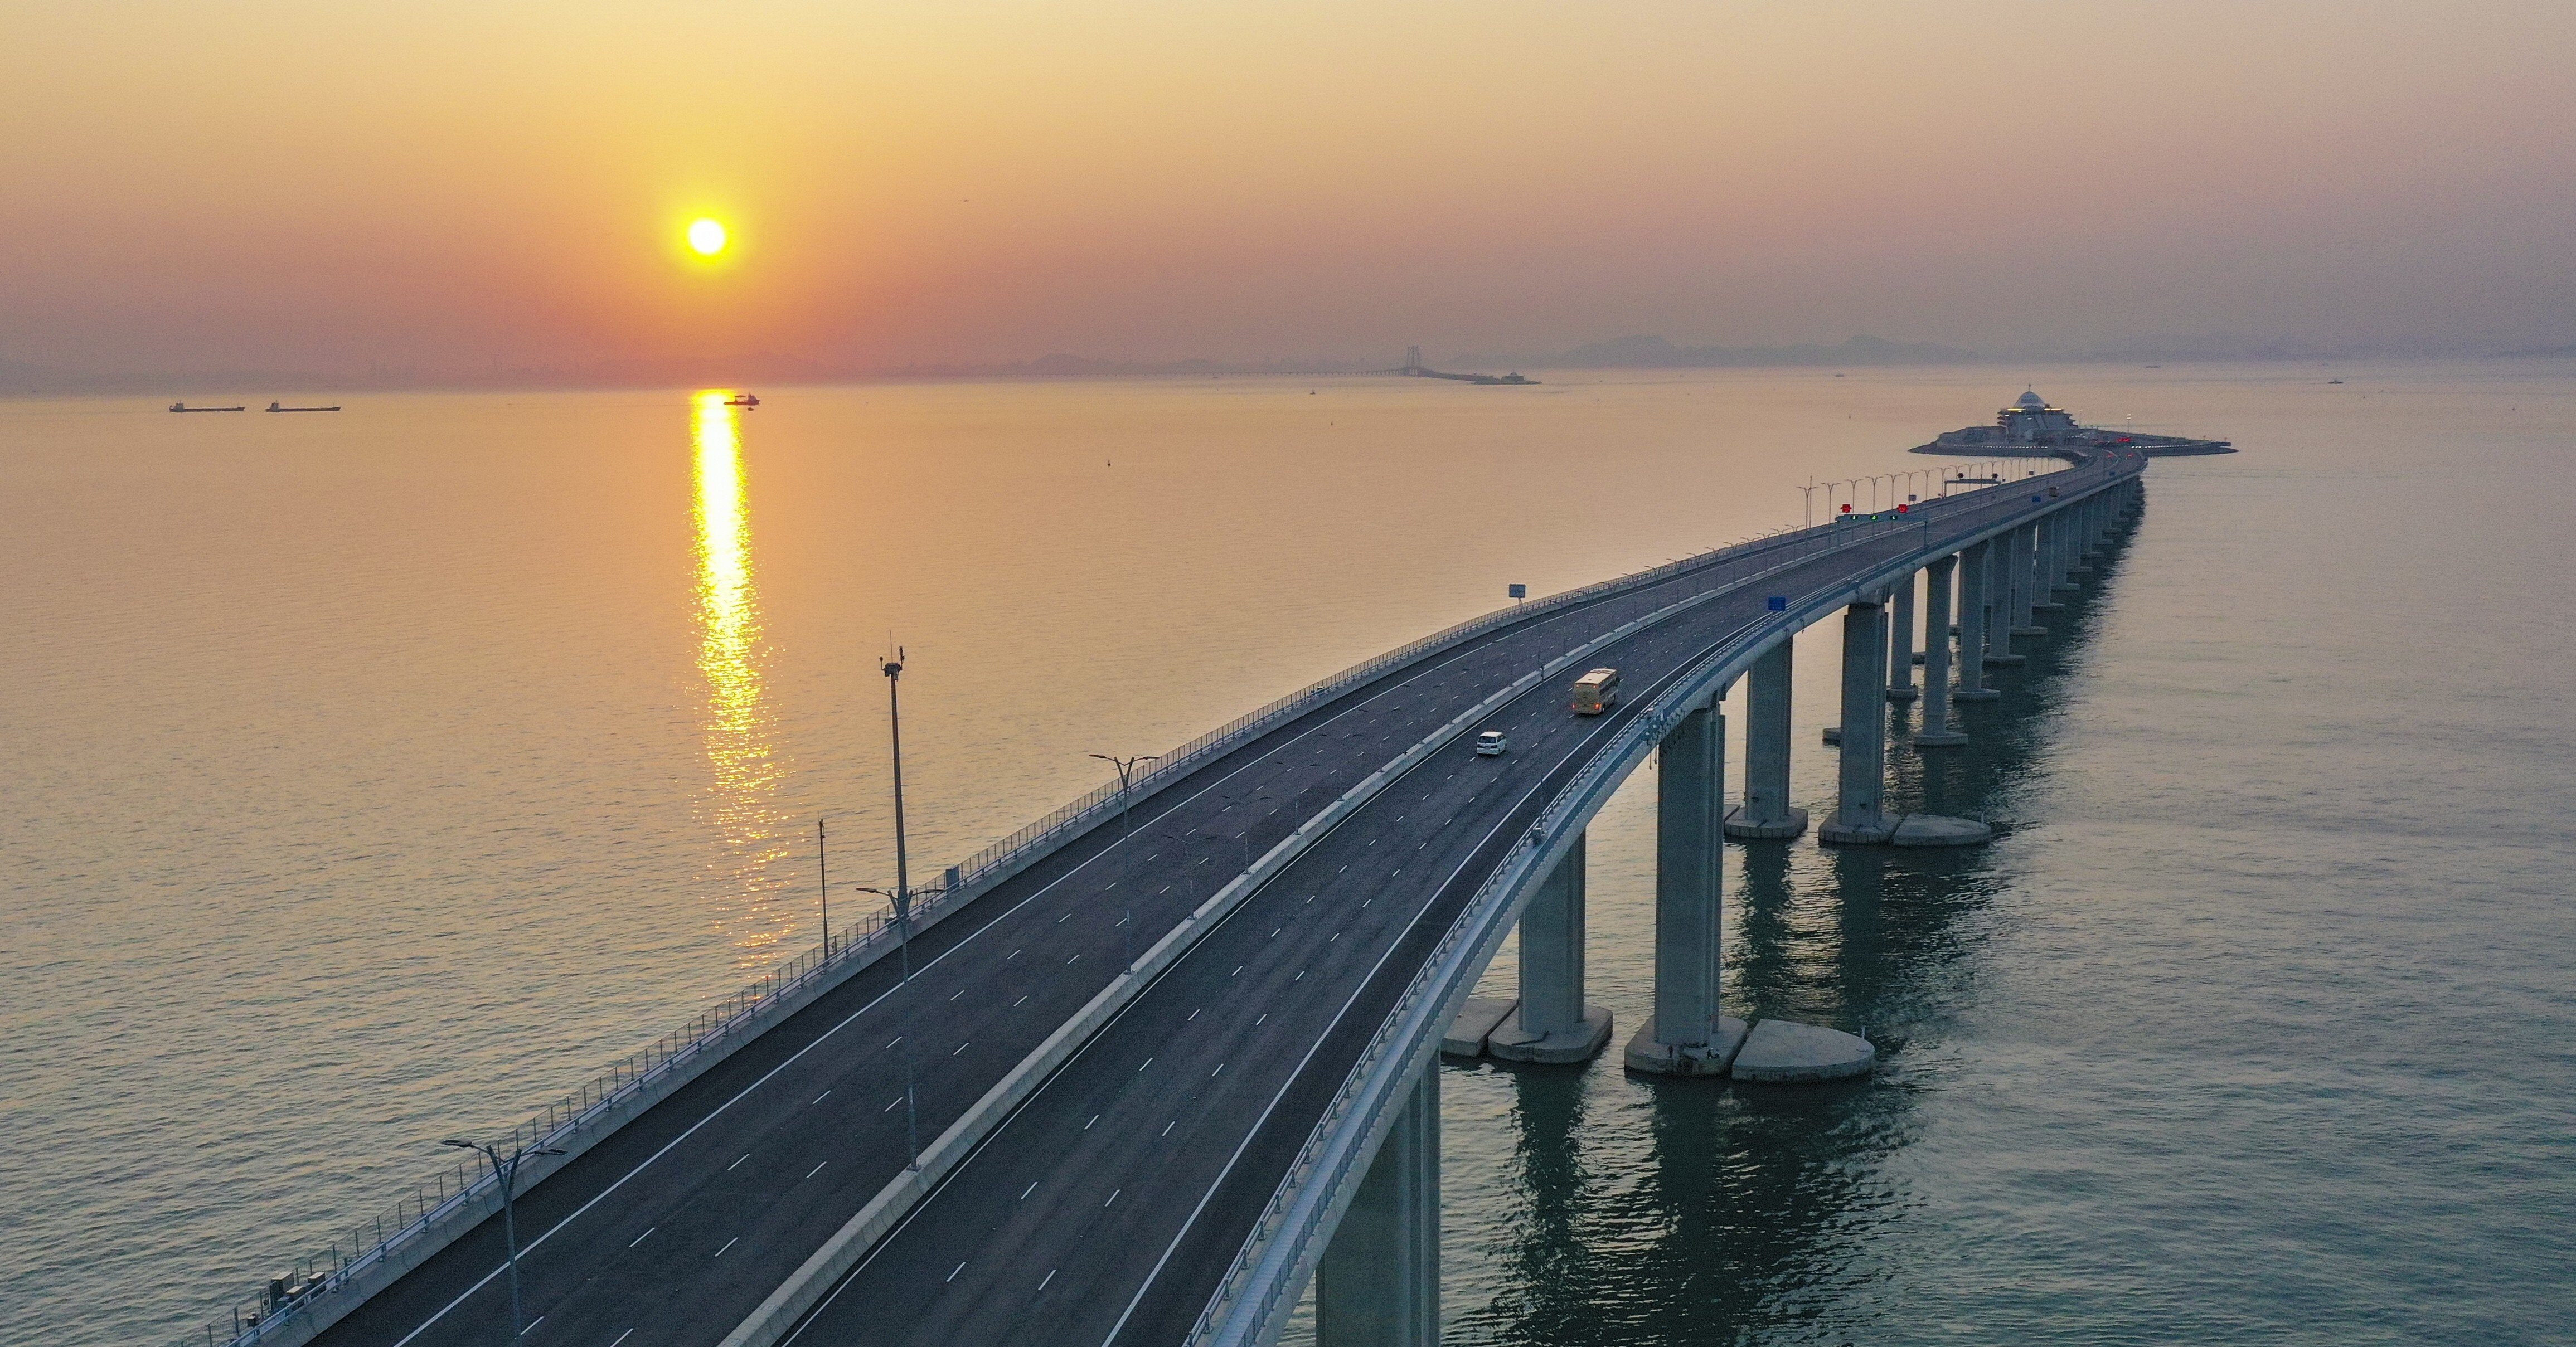 The Hong Kong-Zhuhai-Macau Bridge is one of southern China’s biggest infrastructure projects of recent years. Photo: Winson Wong